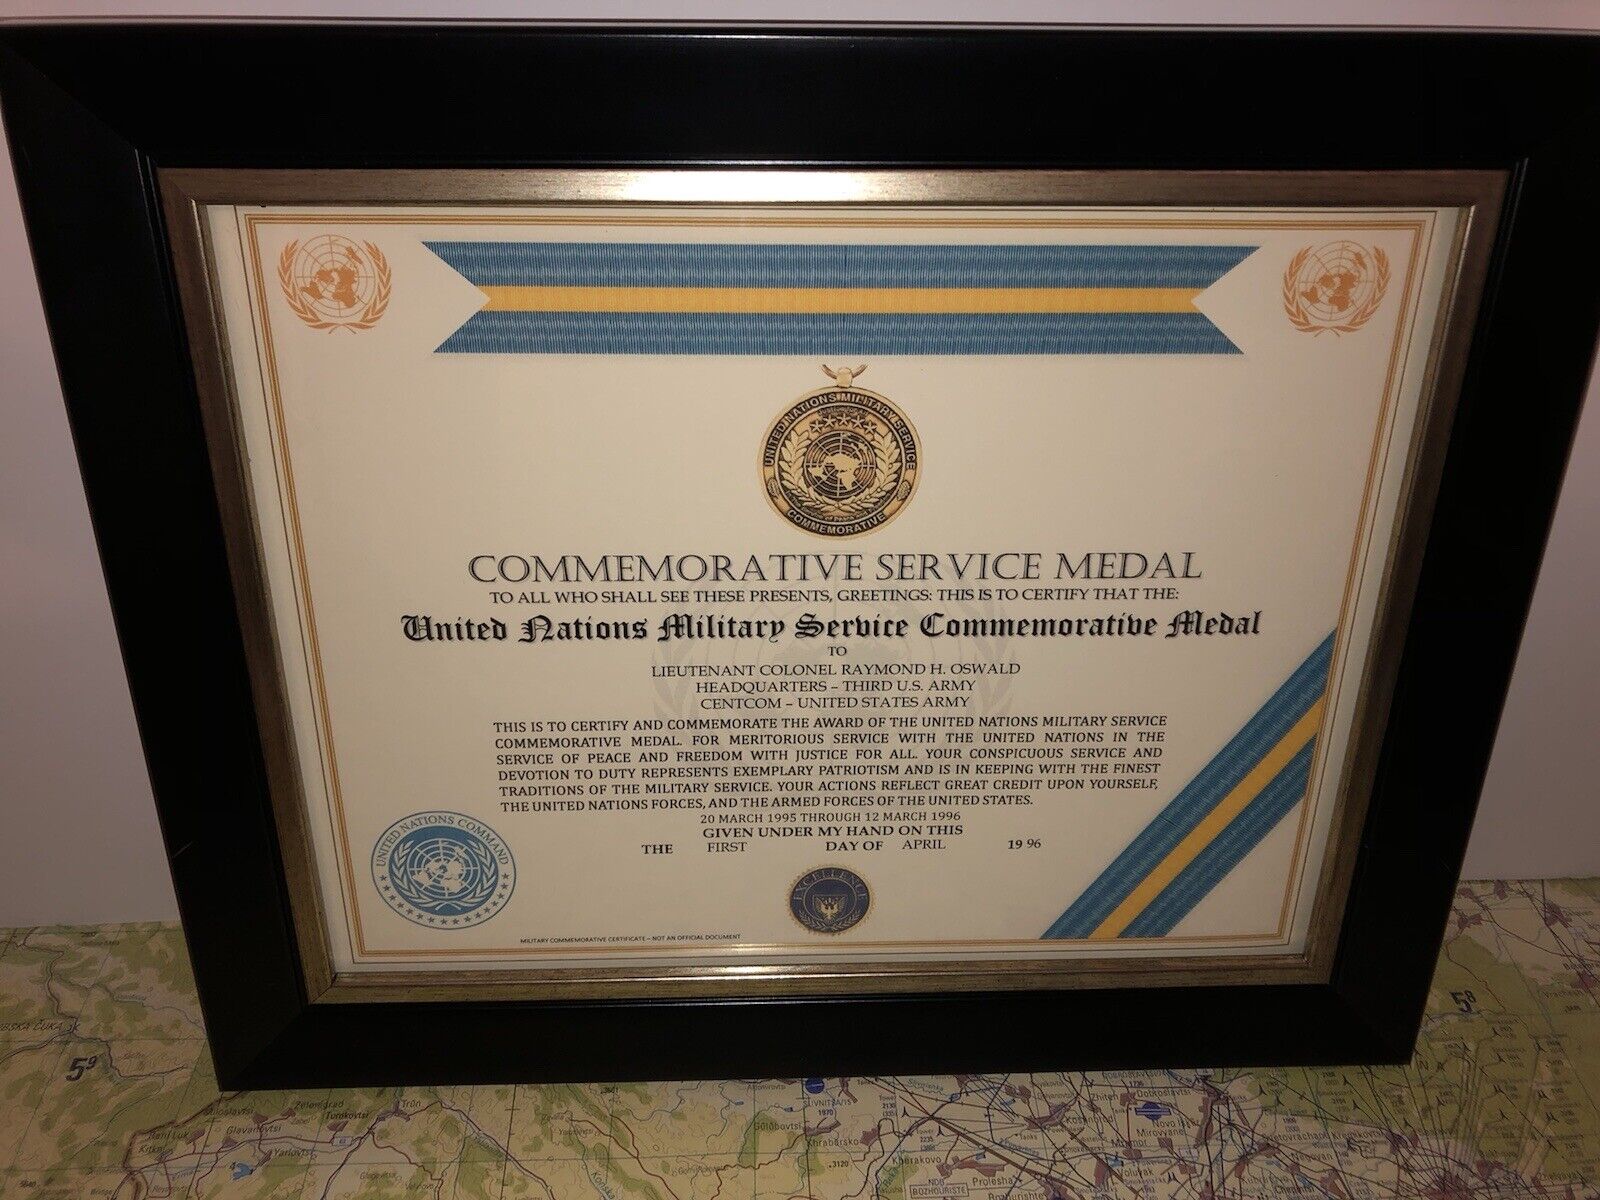 UNITED NATIONS MILITARY SERVICE COMMEMORATIVE MEDAL CERTIFICATE ~ Type 1